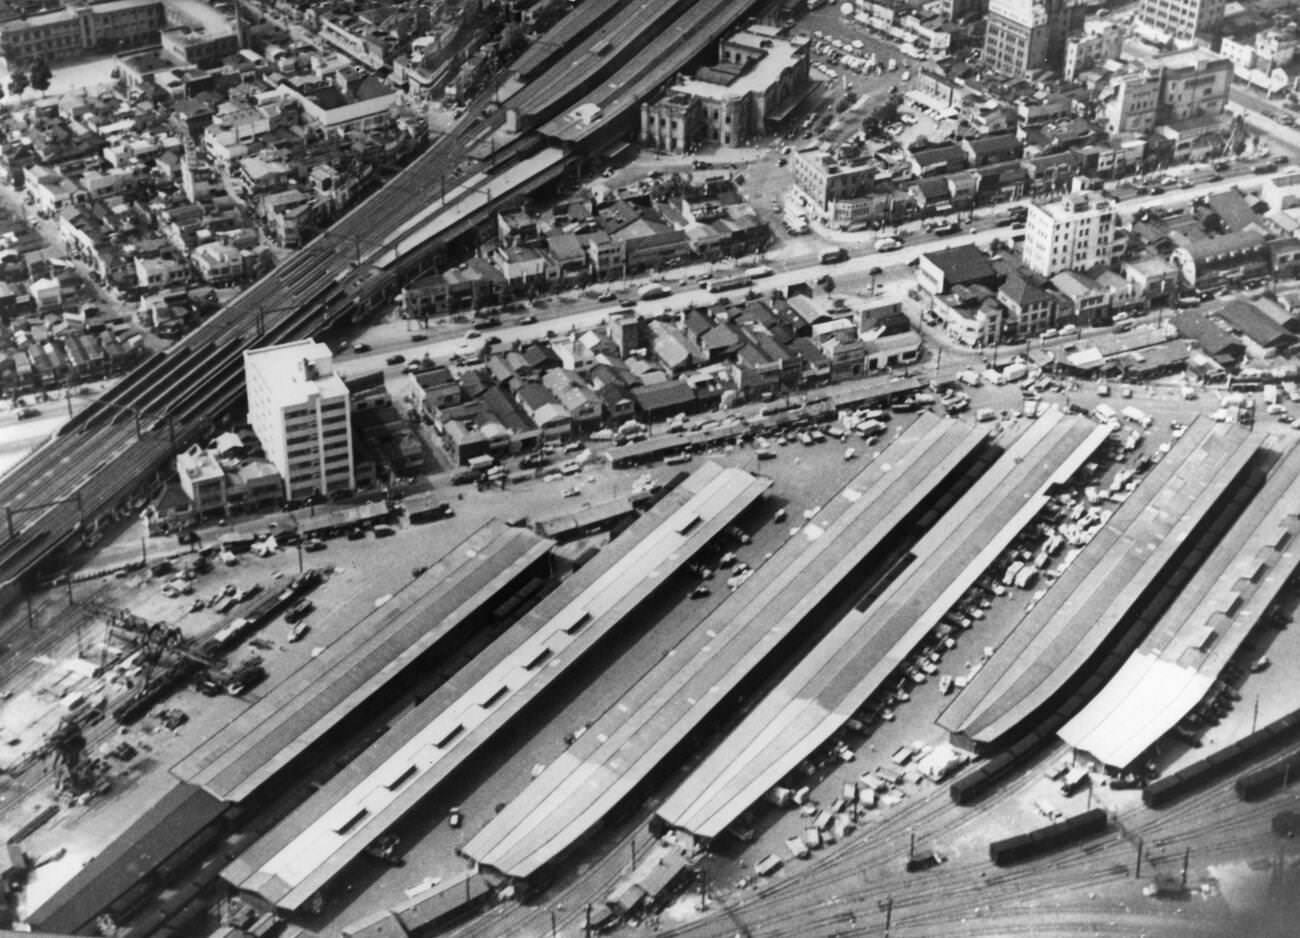 An aerial view of Shimbashi station, 1957.